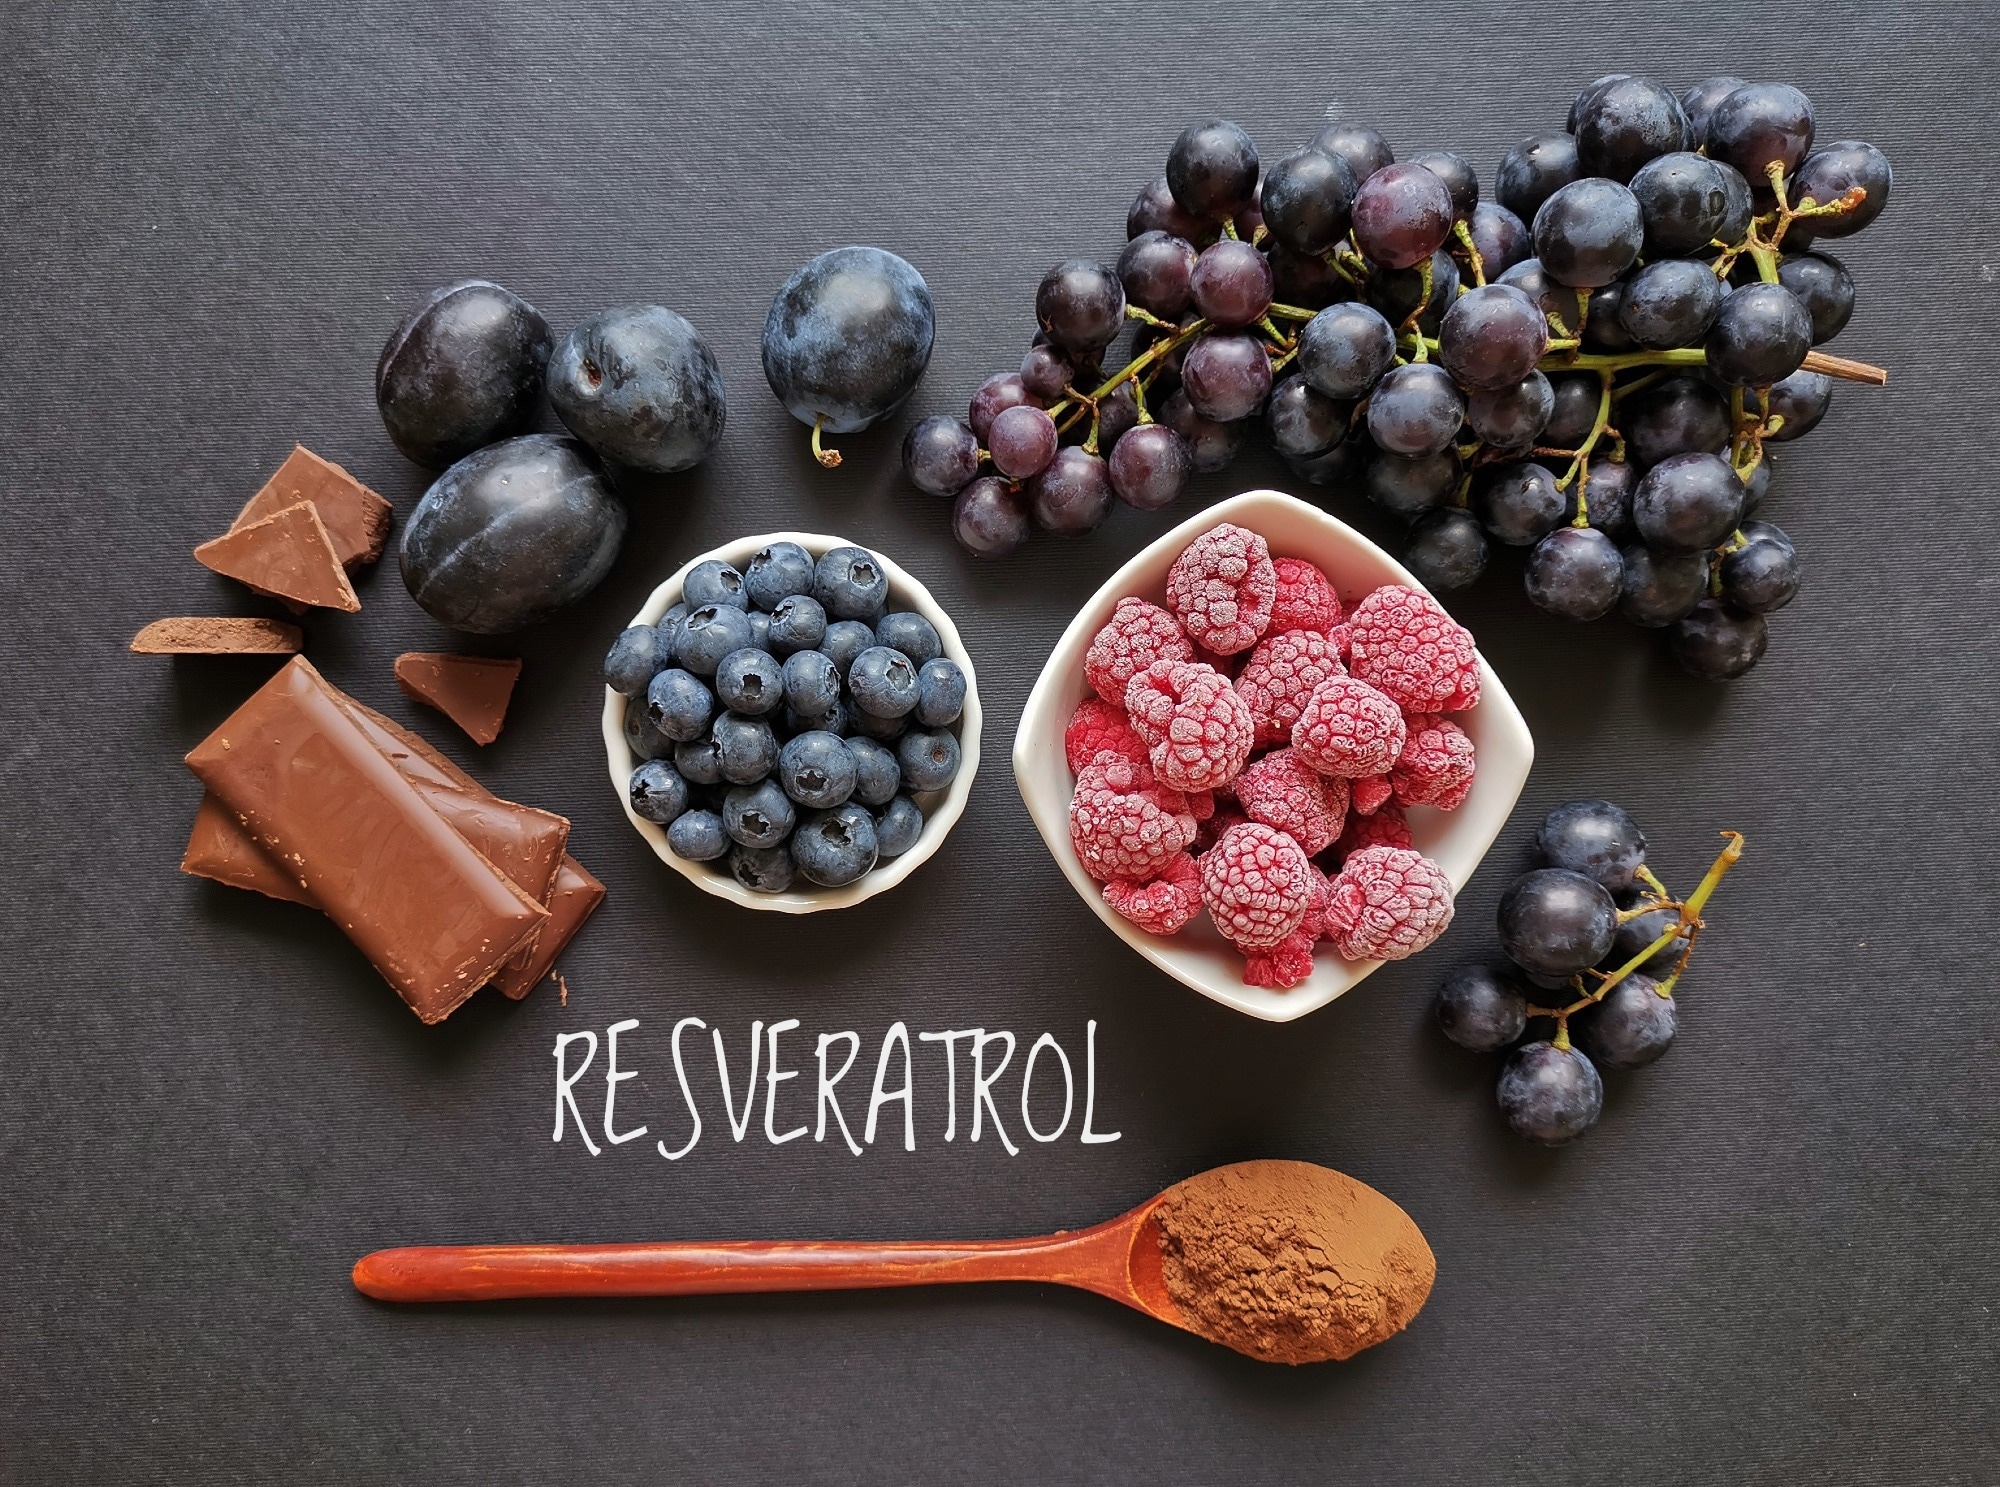 Study: The Pharmacological Properties of Red Grape Polyphenol Resveratrol: Clinical Trials and Obstacles in Drug Development. Image Credit: Danijela Maksimovic/Shutterstock.com